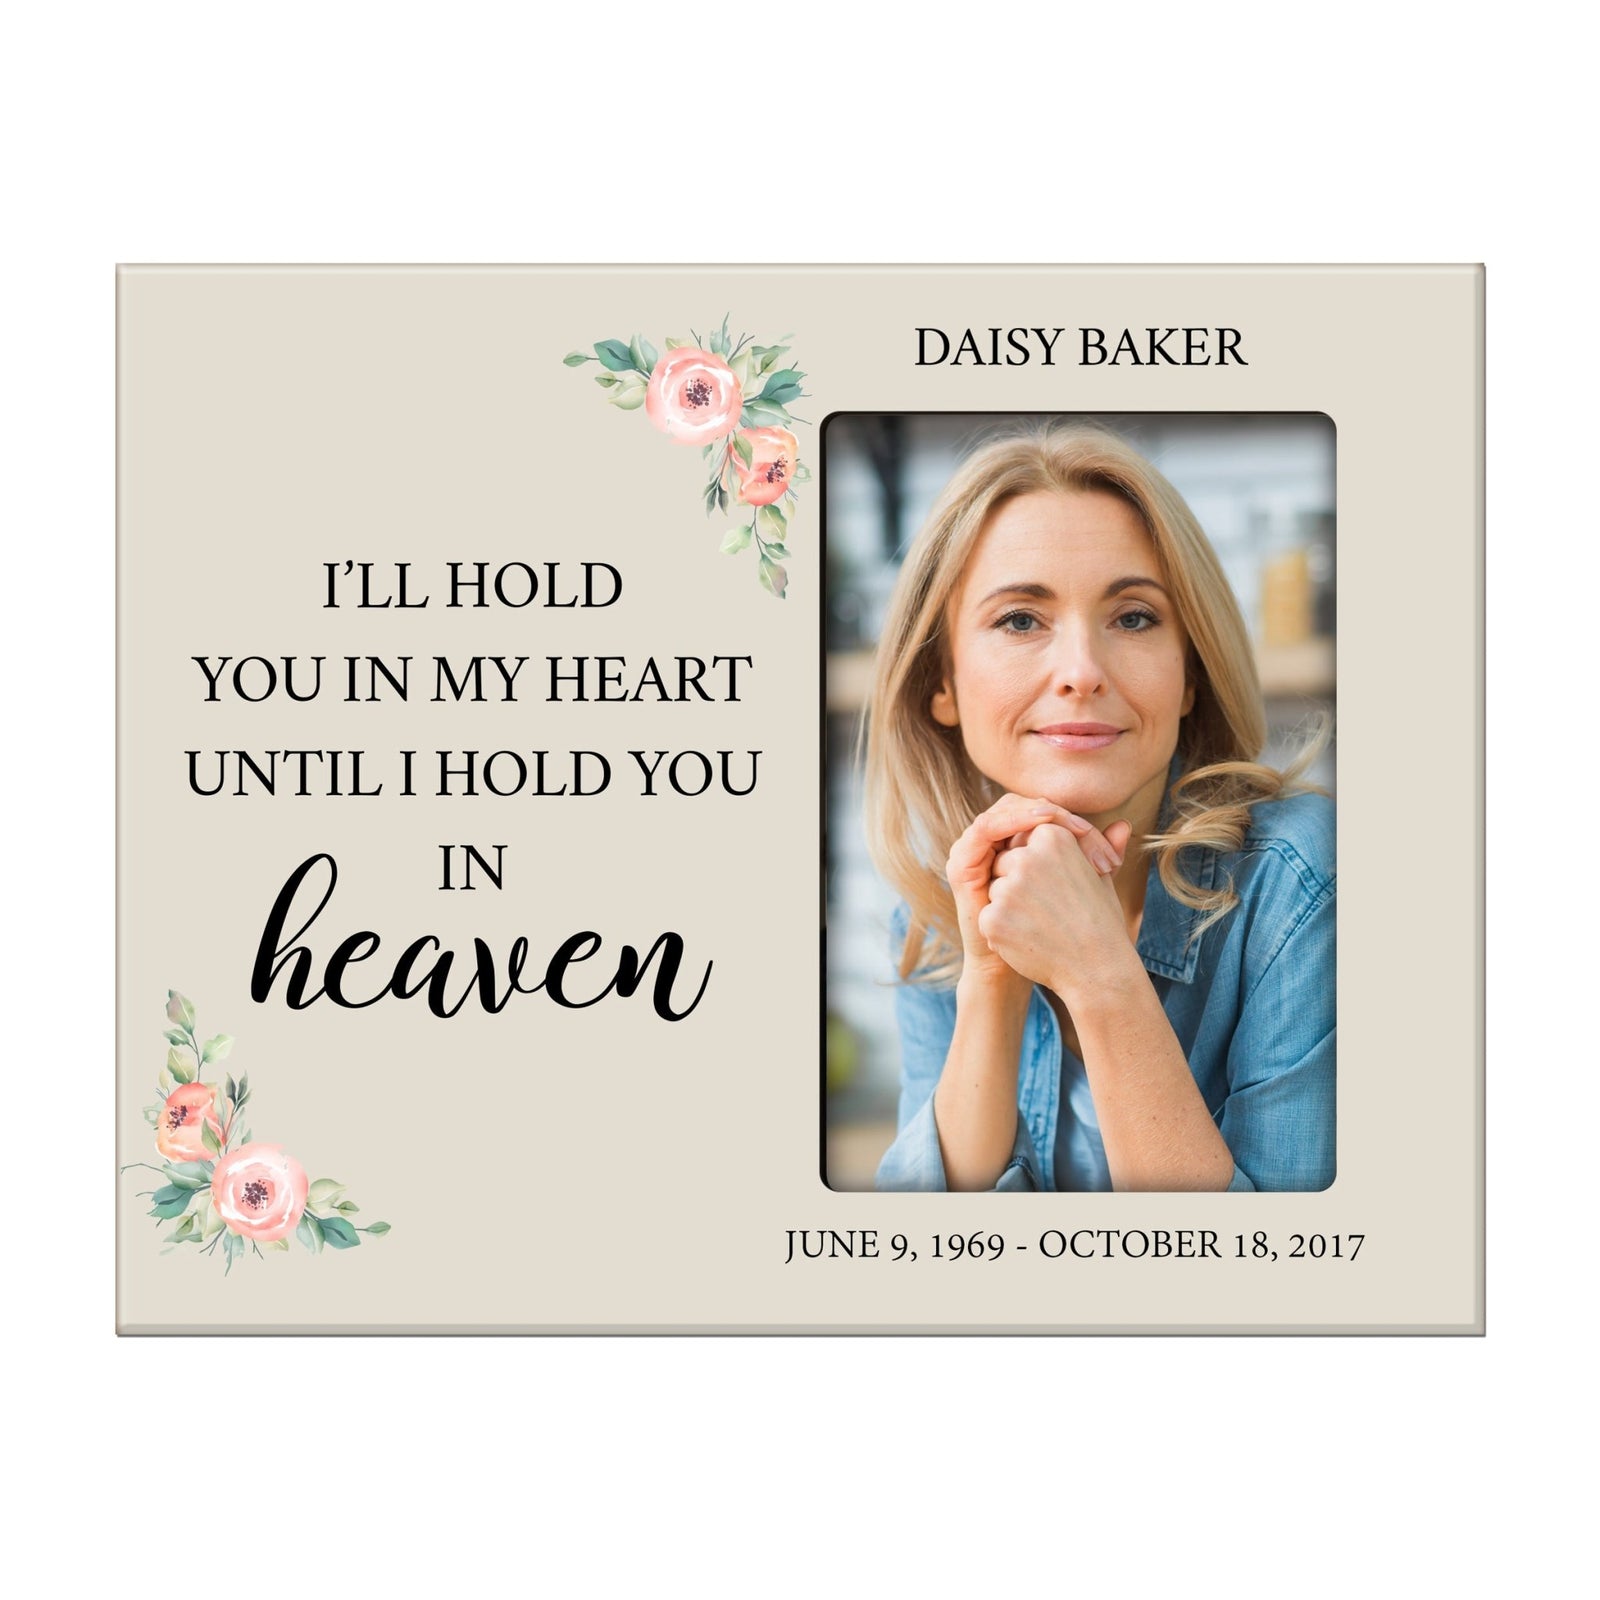 Personalized Horizontal 8x10 Wooden Memorial Picture Frame Holds 4x6 Photo - I’ll Hold You In My (Ivory) - LifeSong Milestones